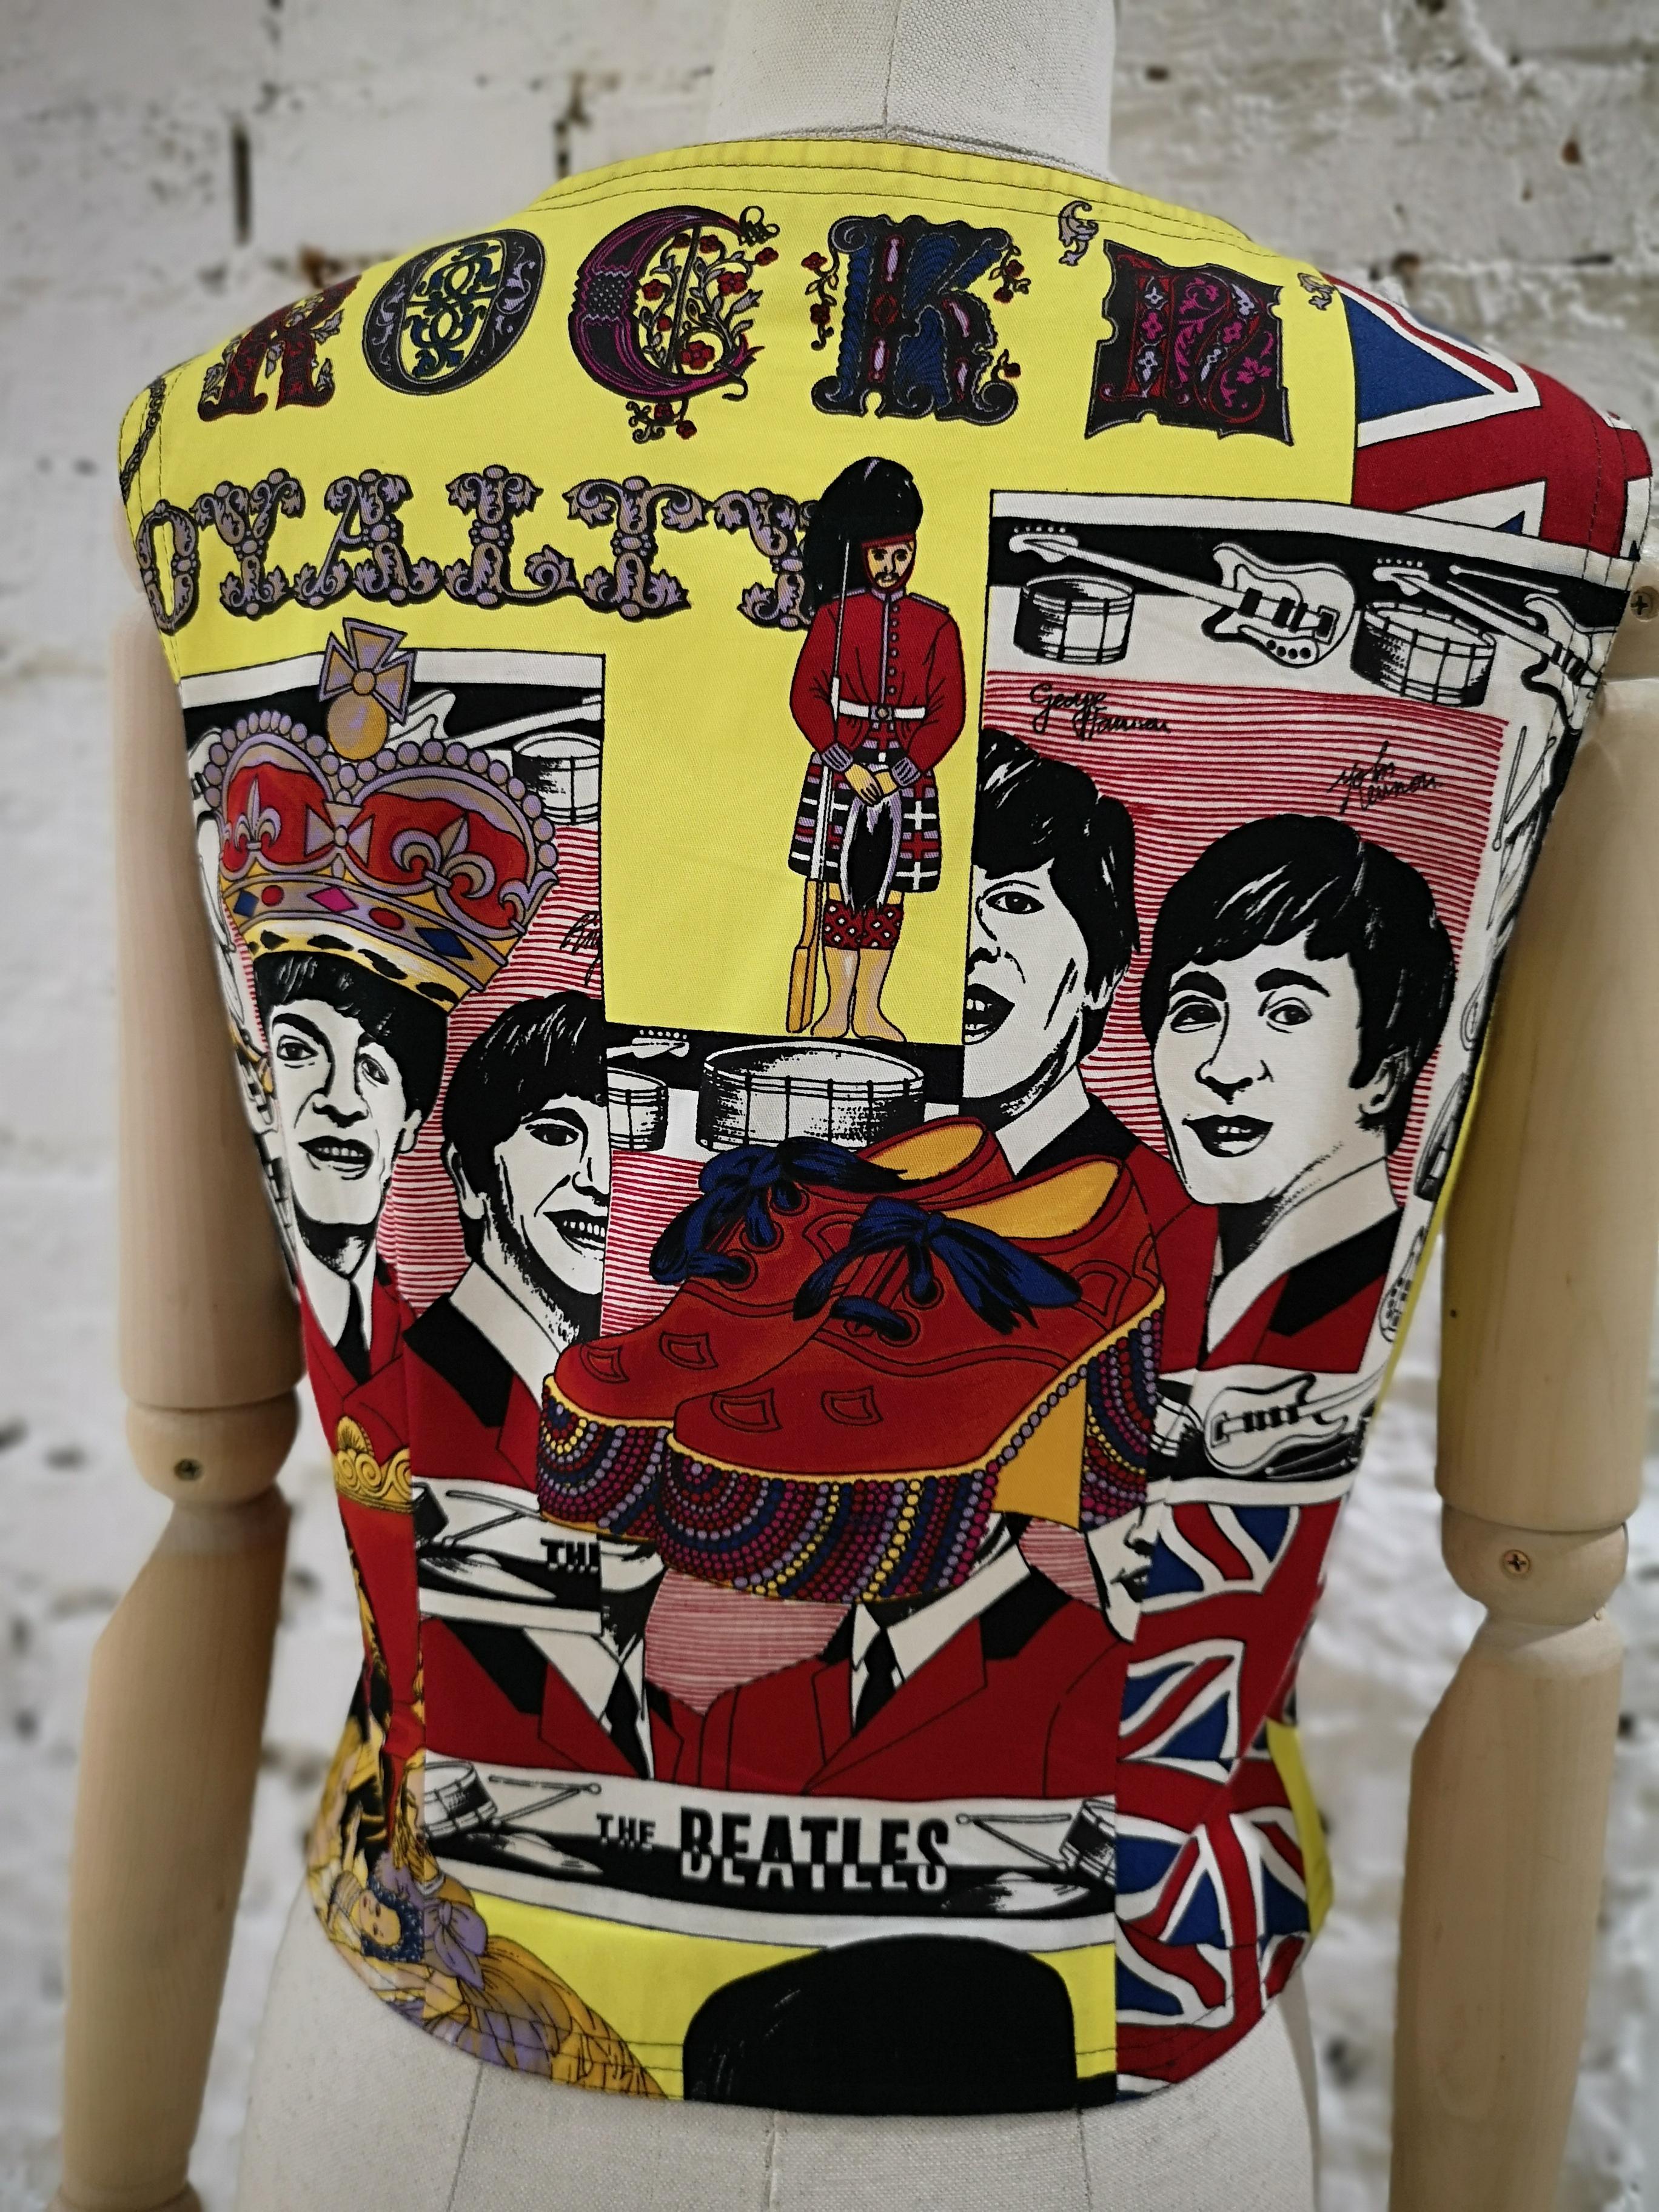 1990s Versace Beatles vest / gilet
Beatles sex pistols rock royalty, baroque print
Totally made in italy in size M